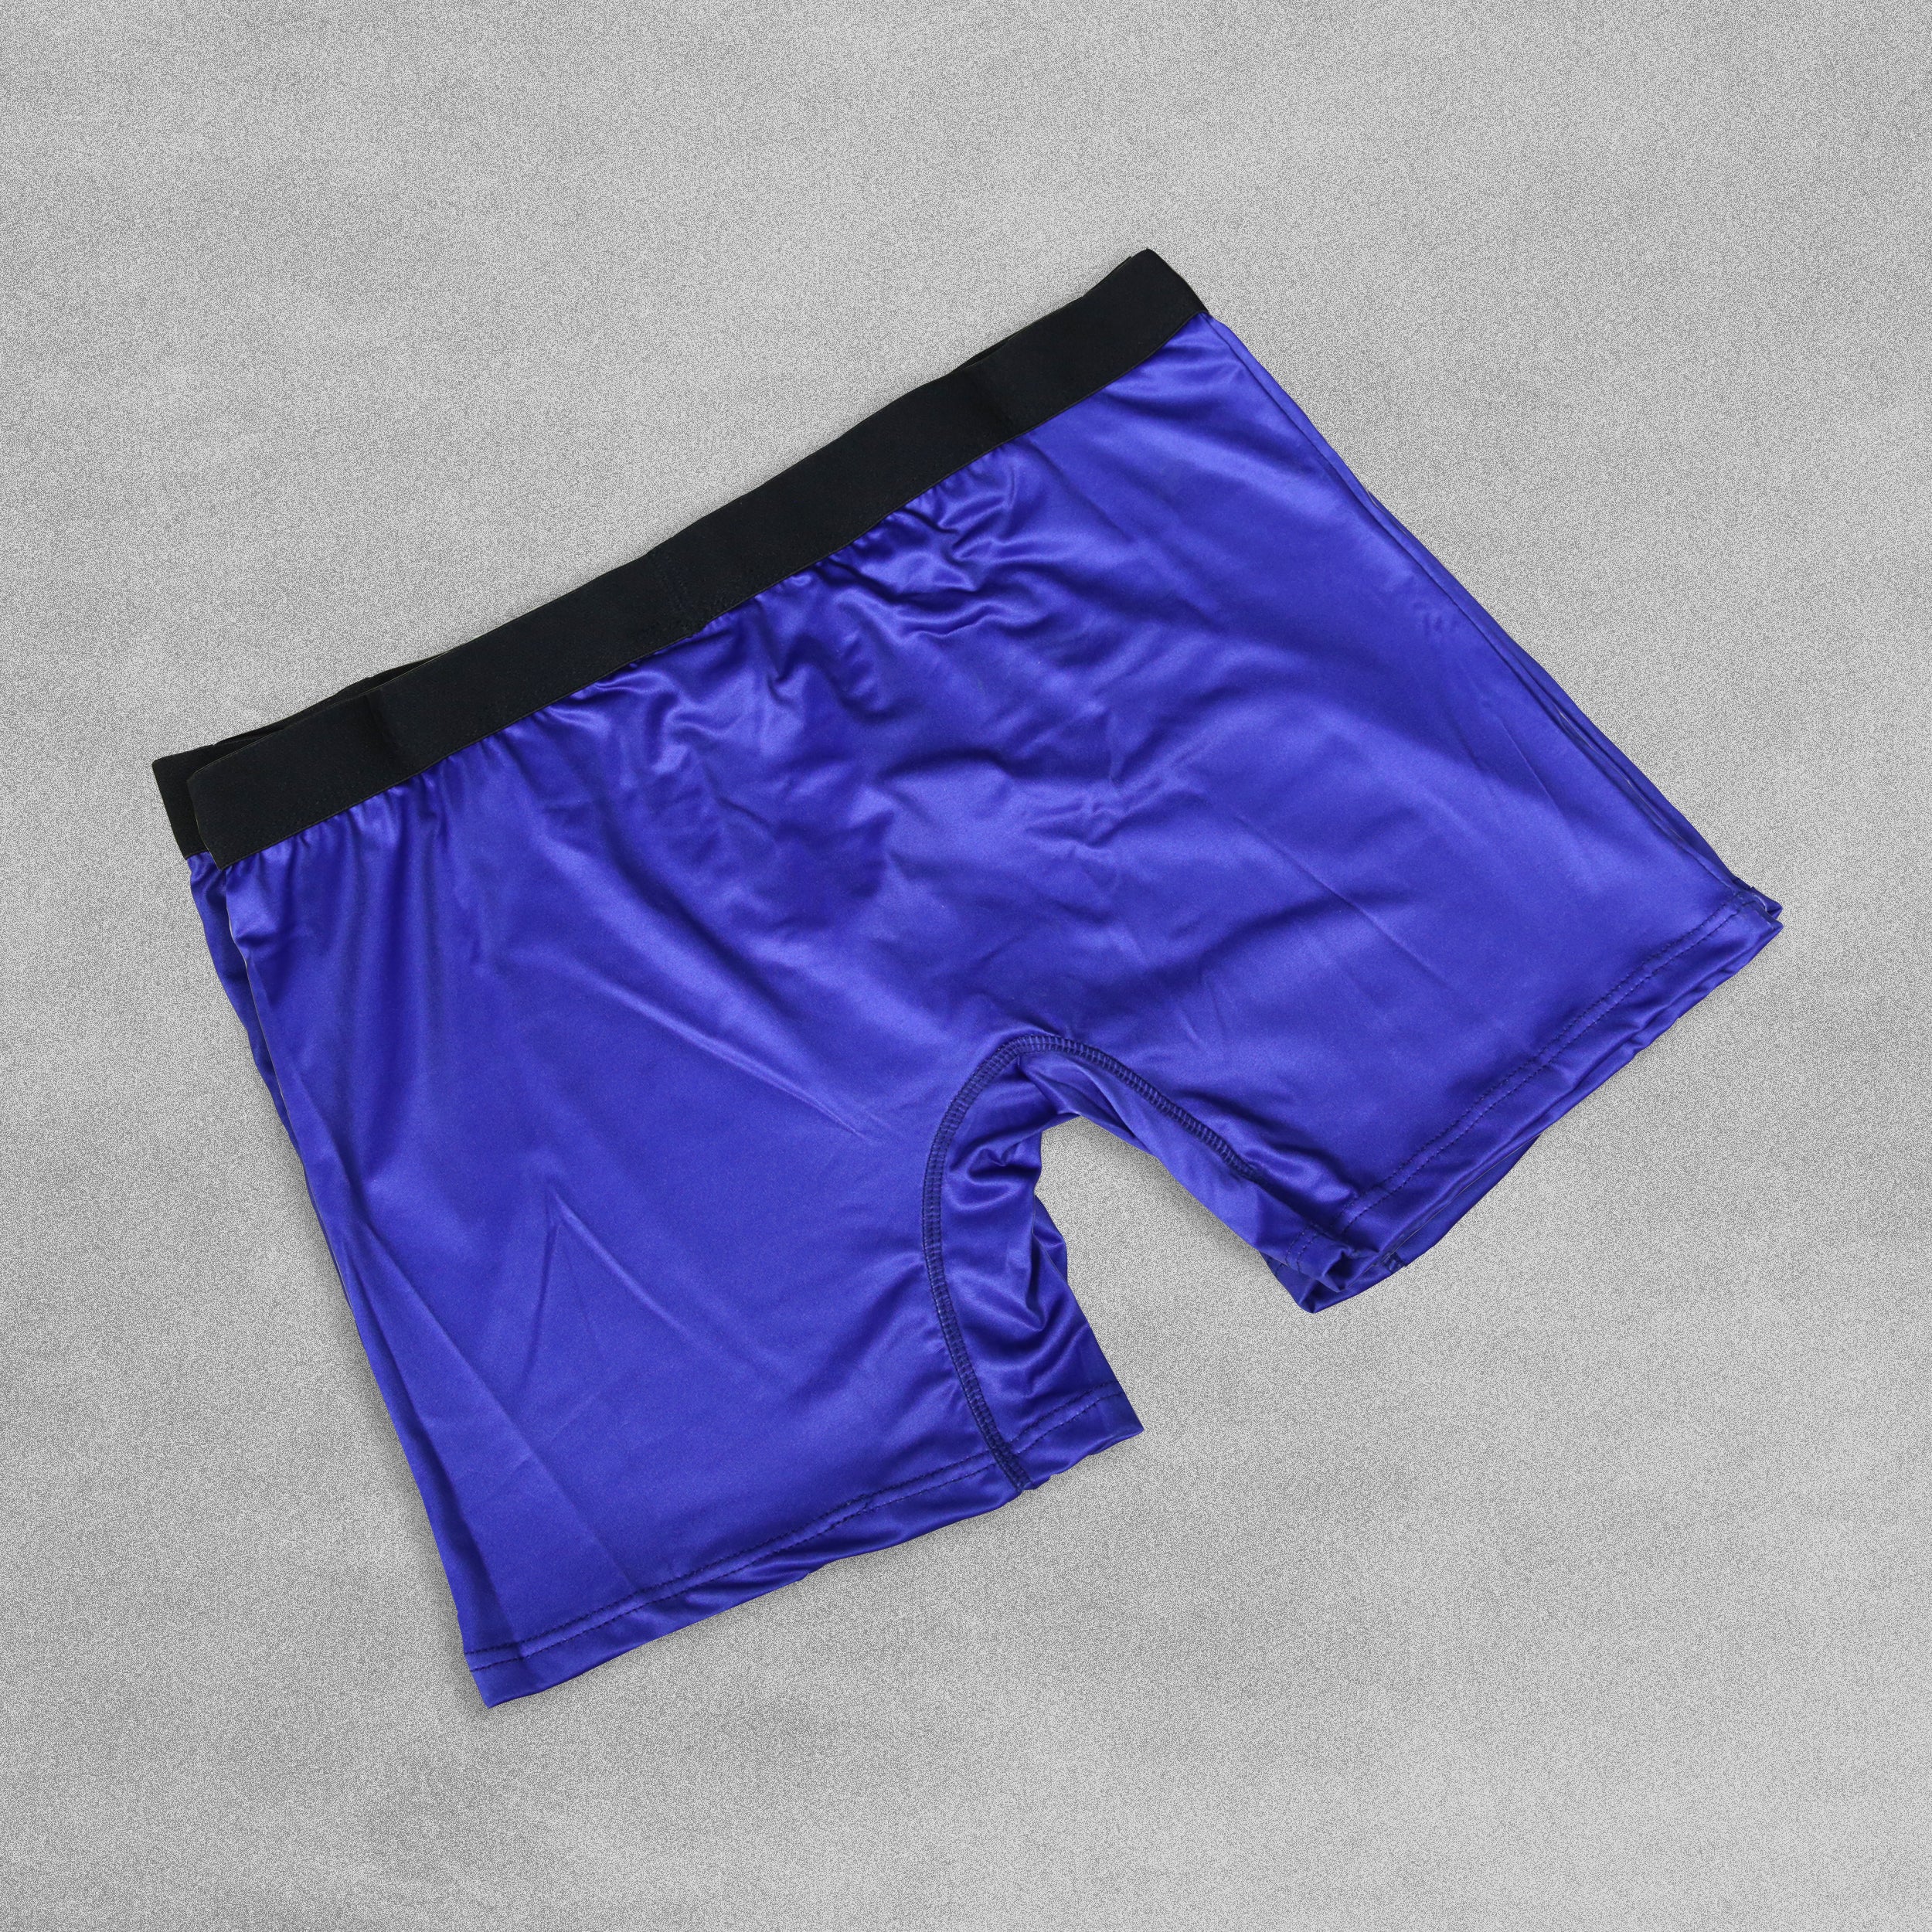 Mens Novelty Boxer Shorts - The Family Jewels!